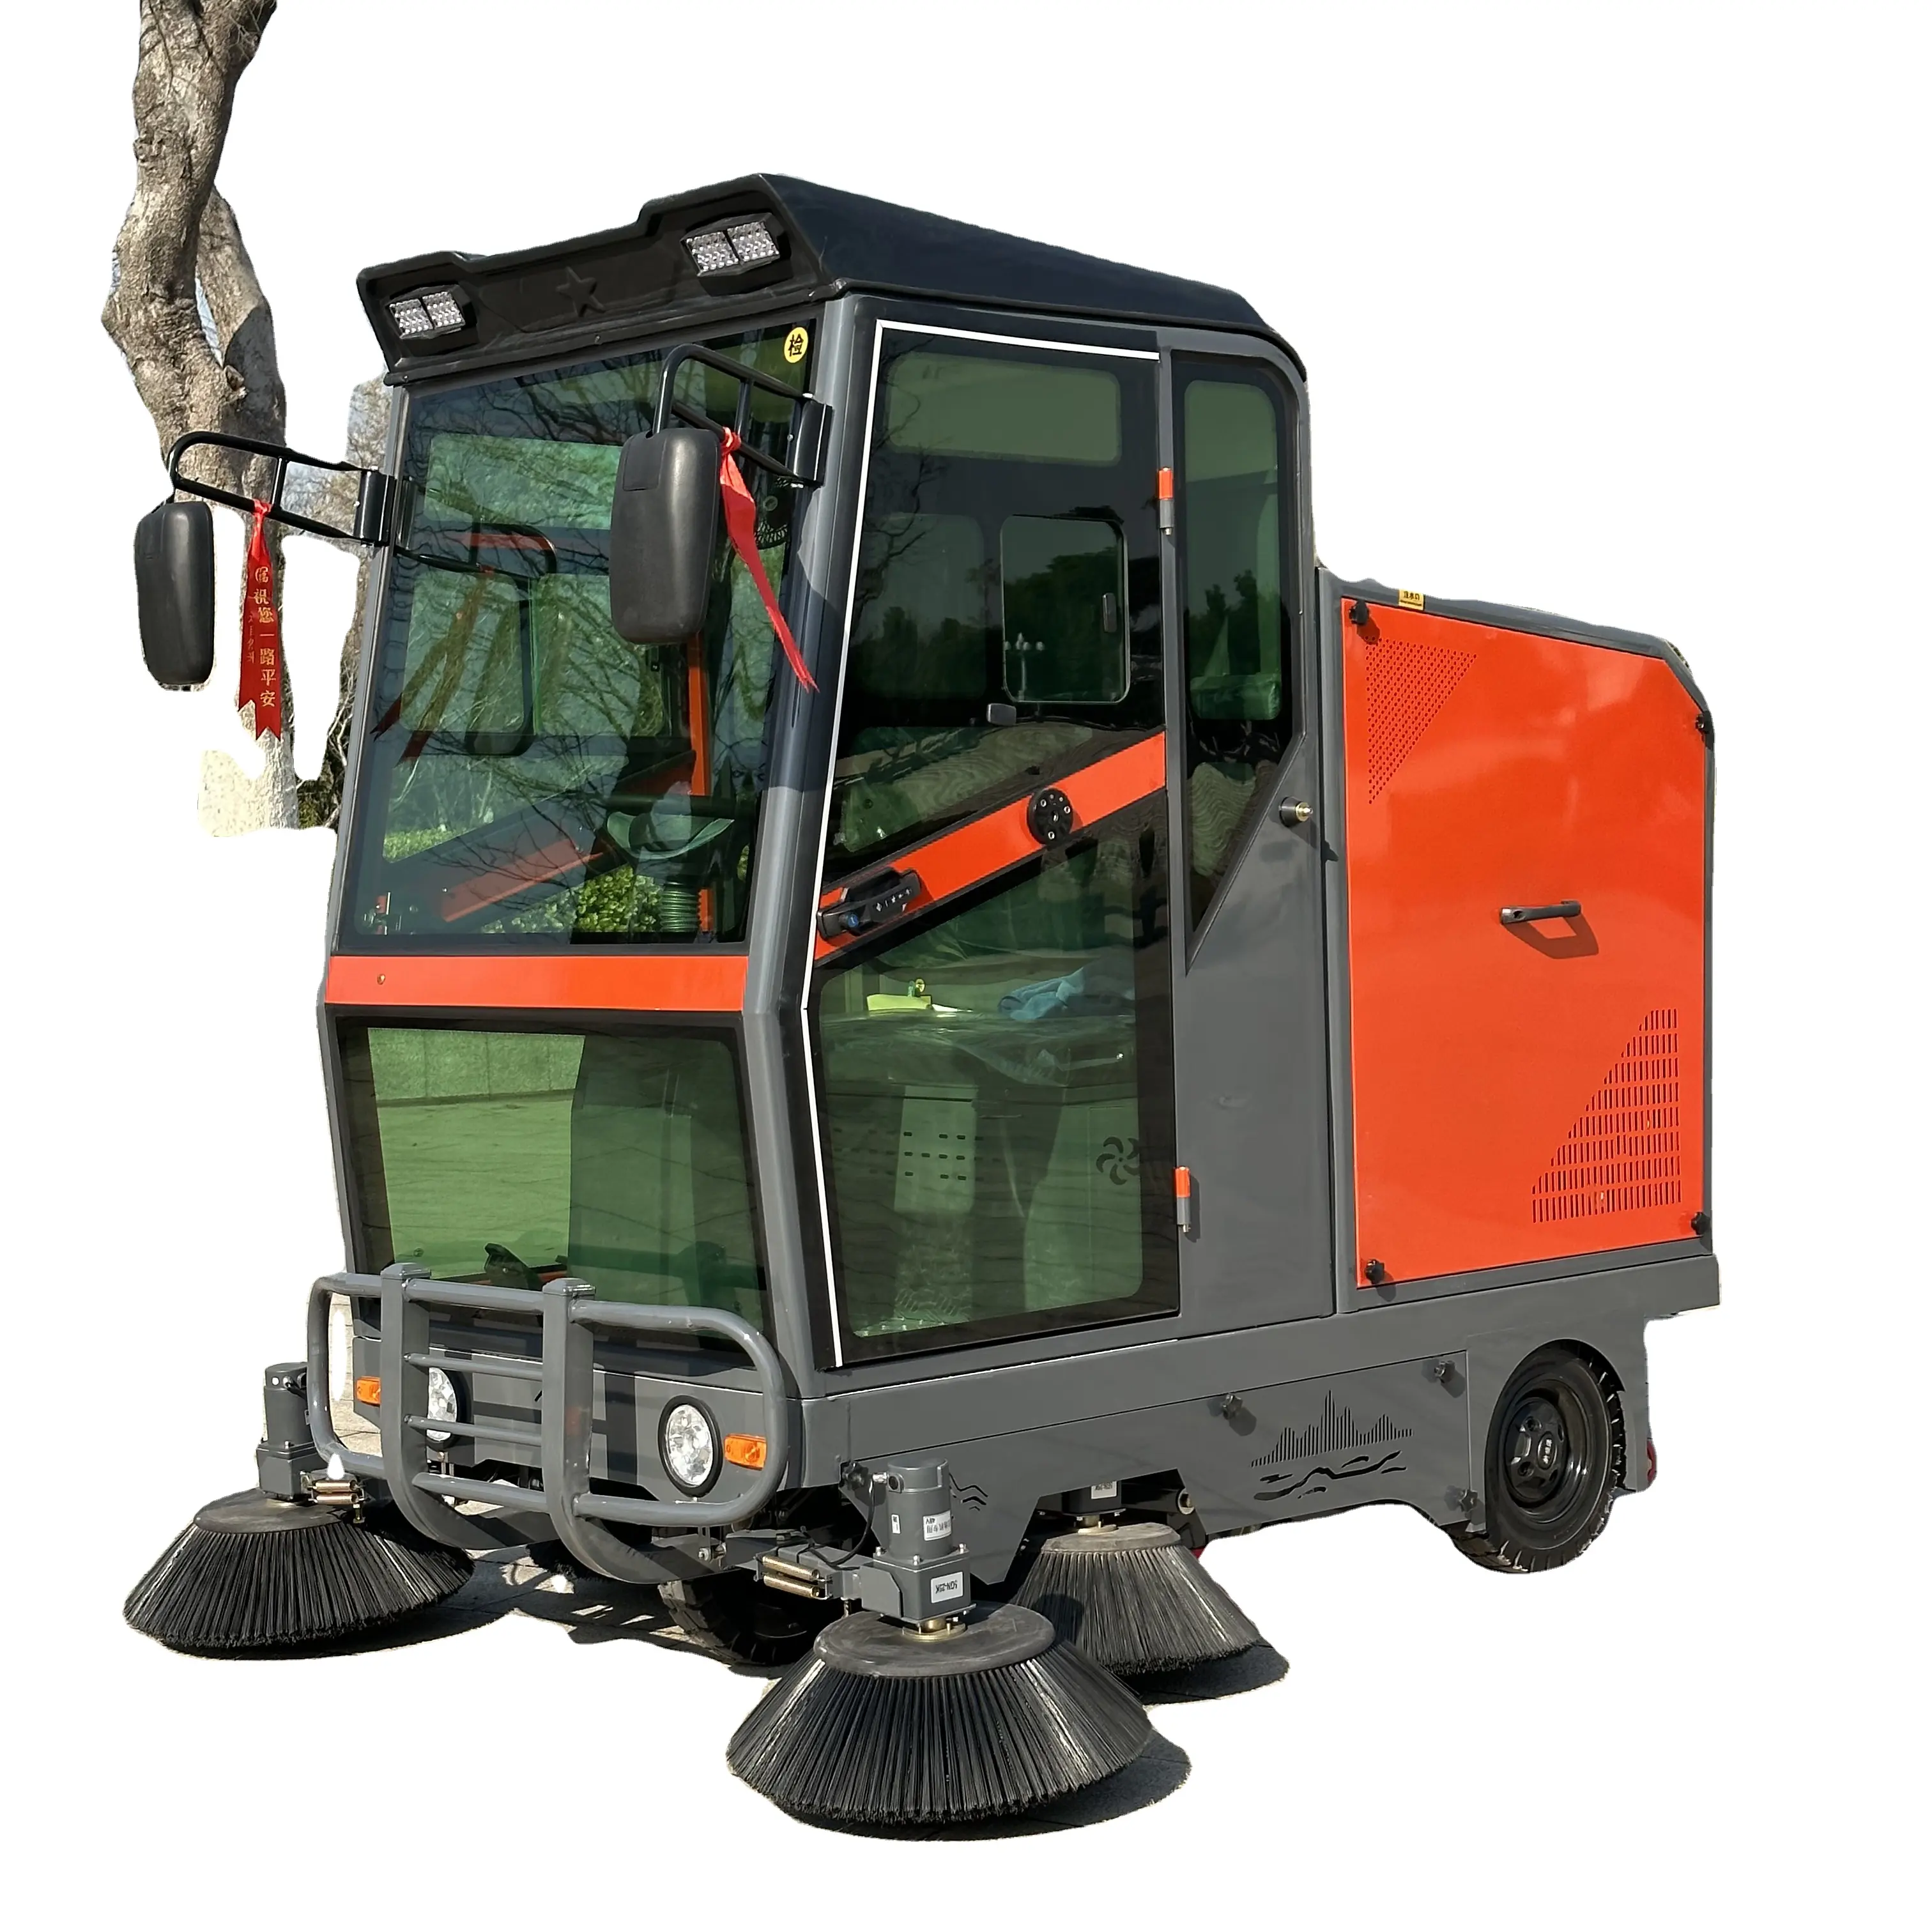 LJL-20E closed floor road brush ride-on industrial street sweeper scrubber machine cleaning equipment